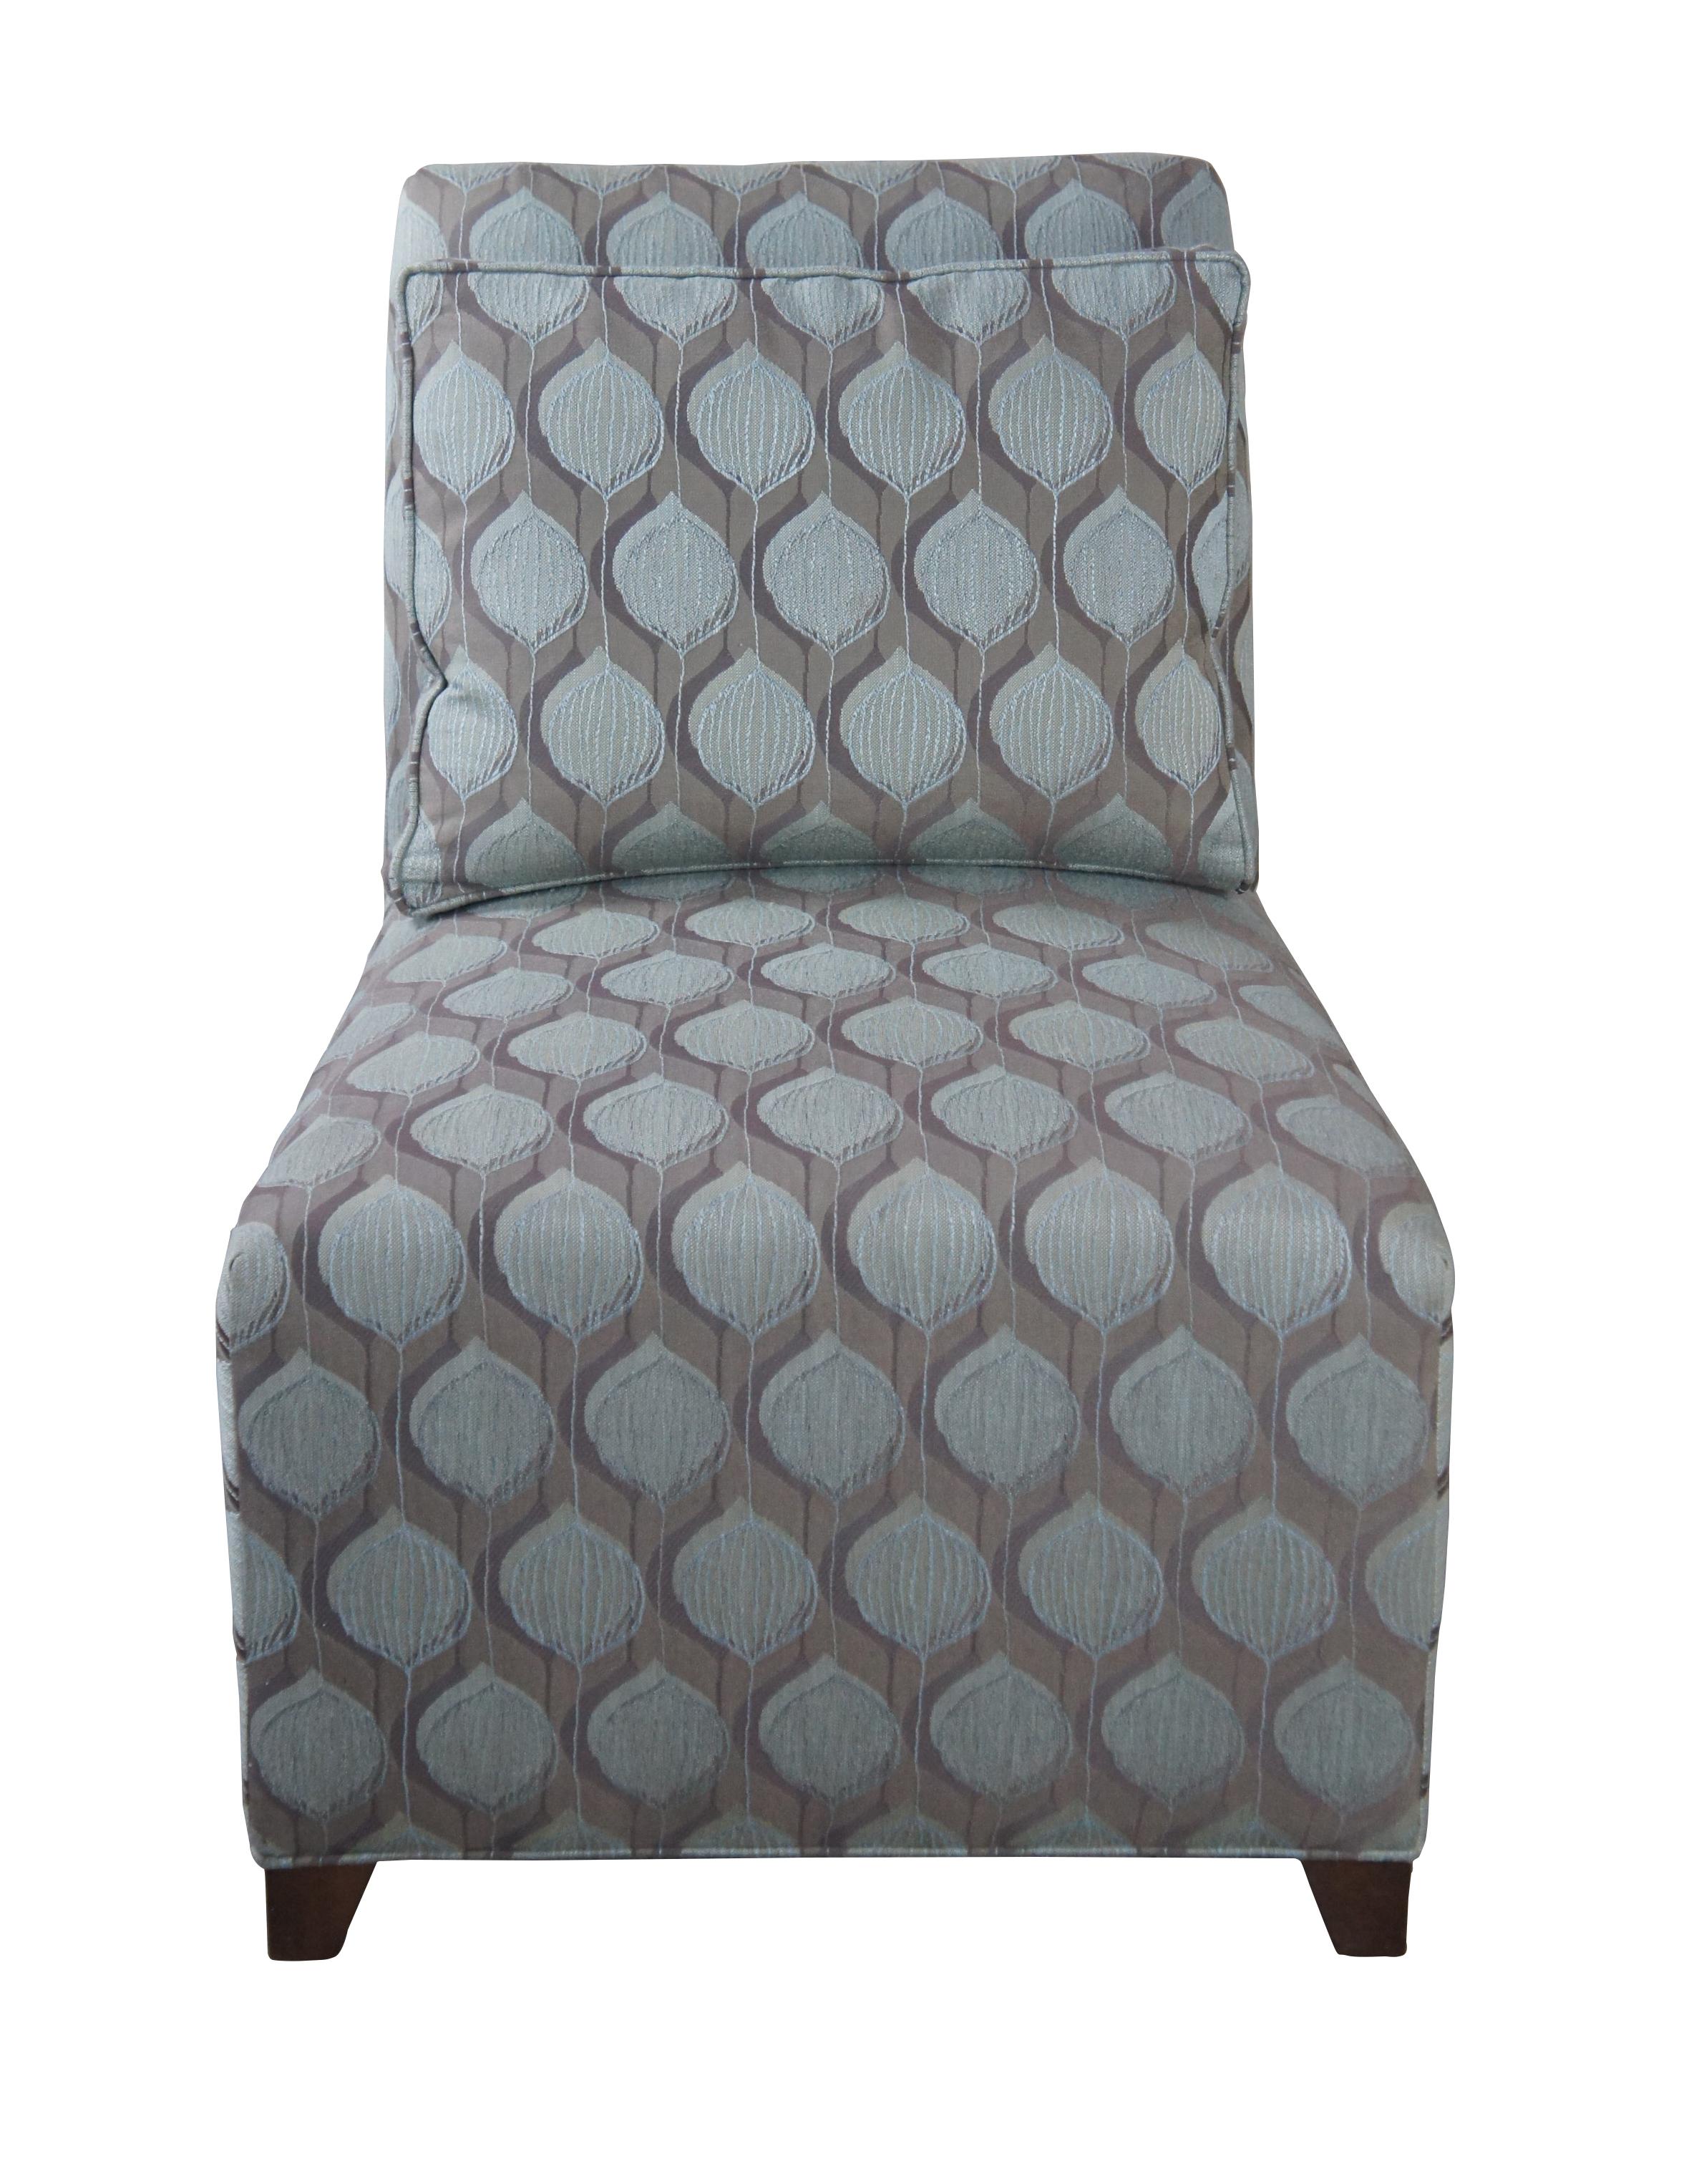 An Ethan Allen transitional slipper chair. Features a geometric fabric with lumbar bolster pillow. The chair is supported by square tapered feet. #20-7537